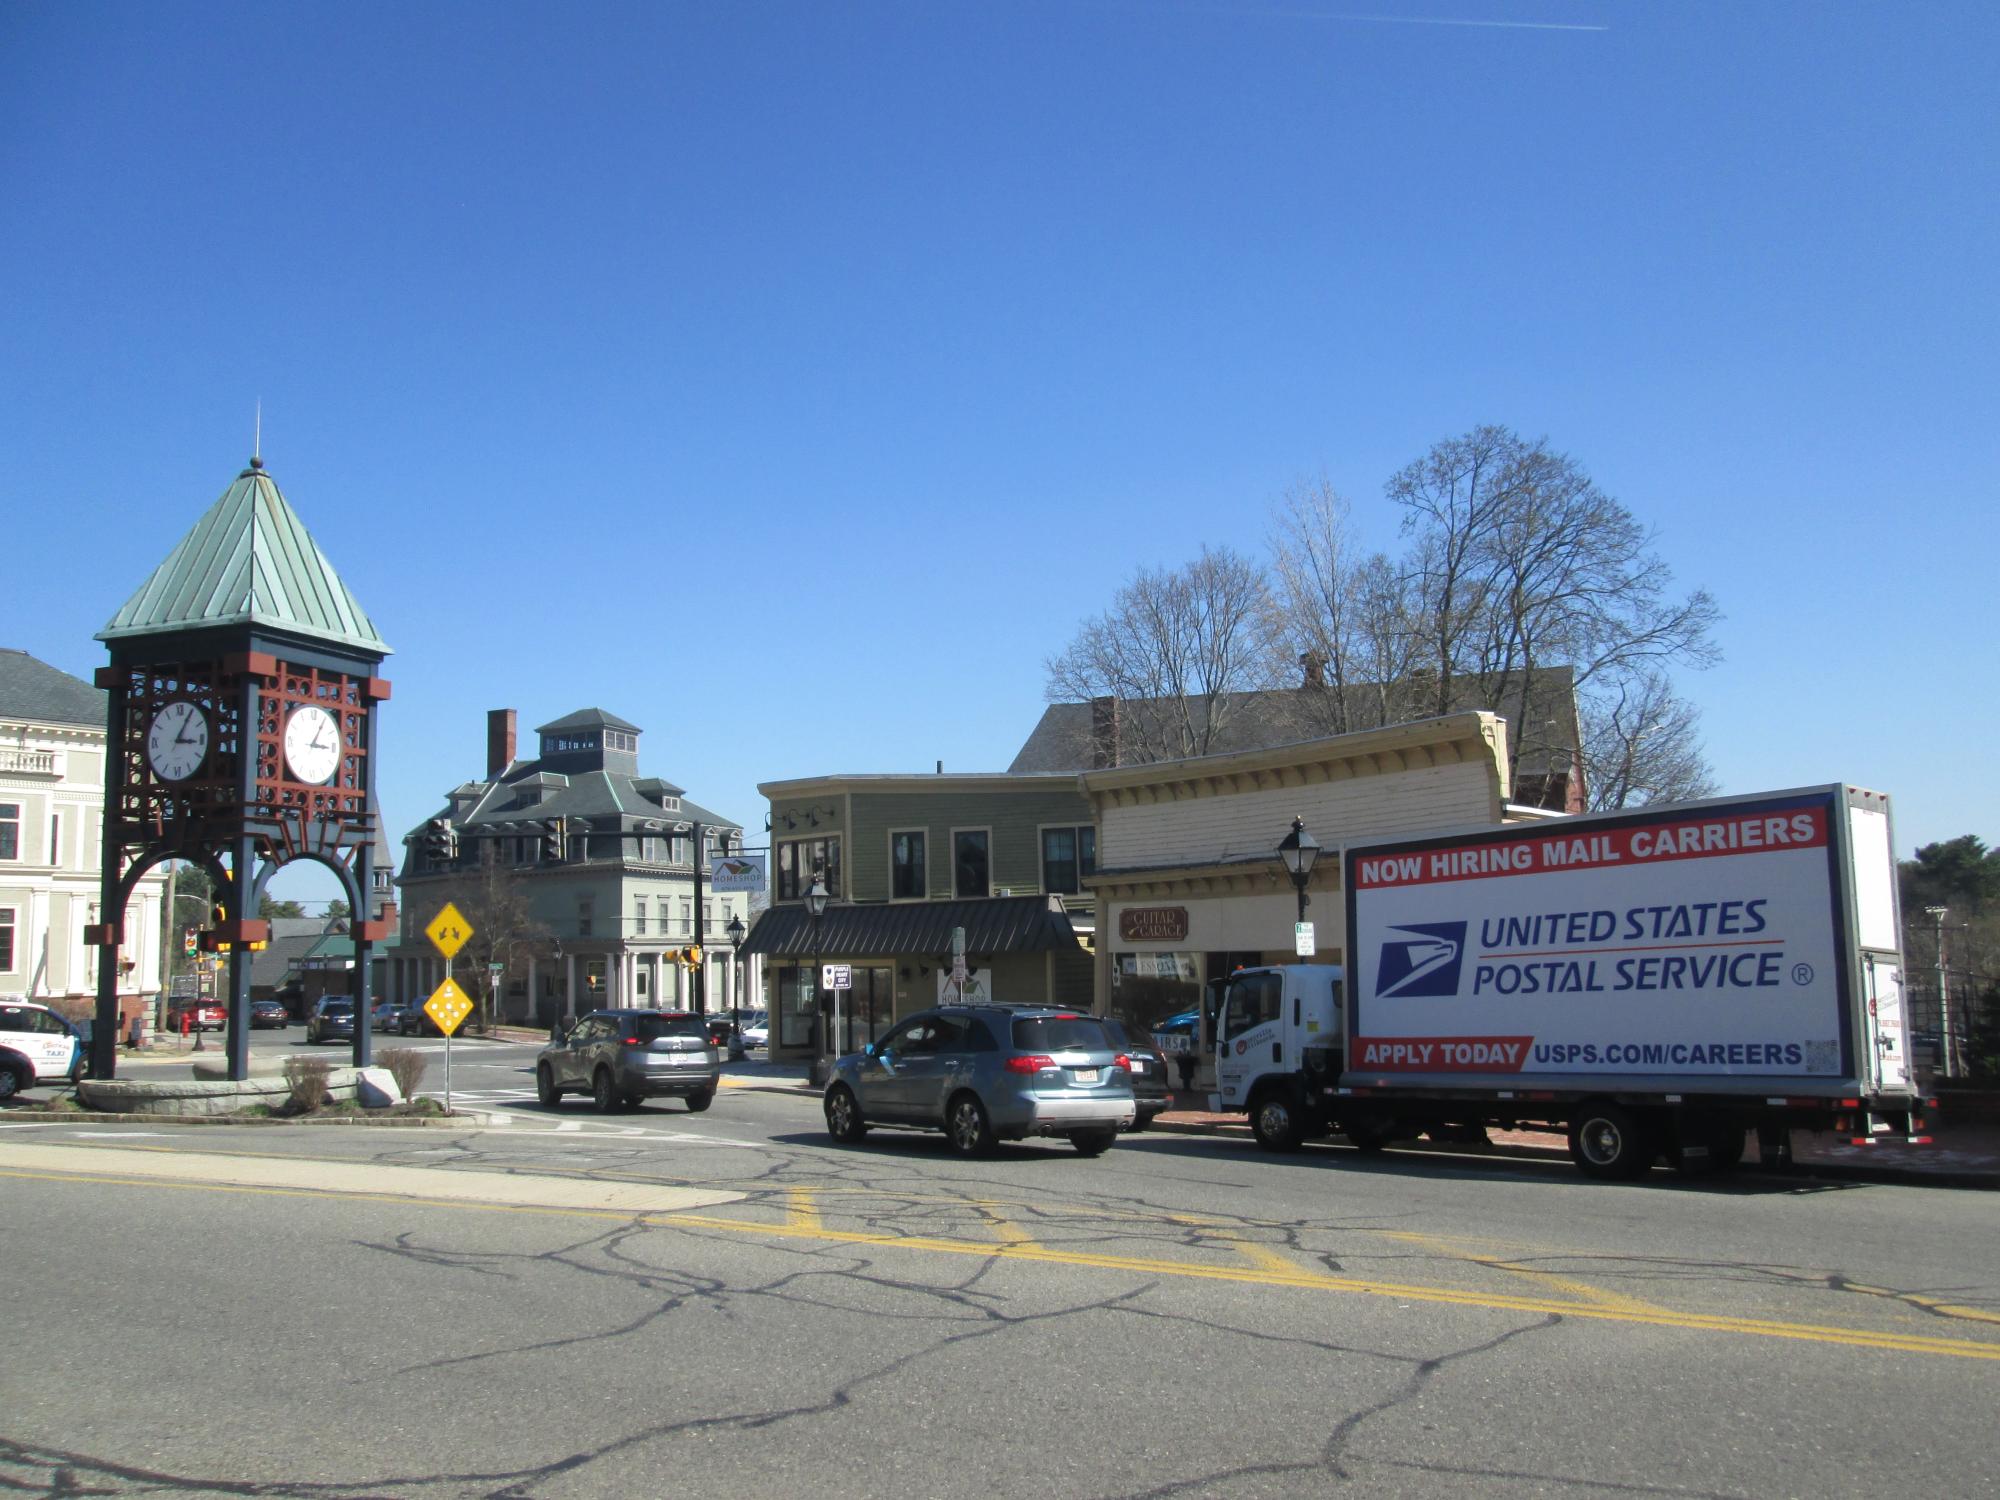 USPS Now Hiring Mail Carriers mobile billboard in Methuen MA.